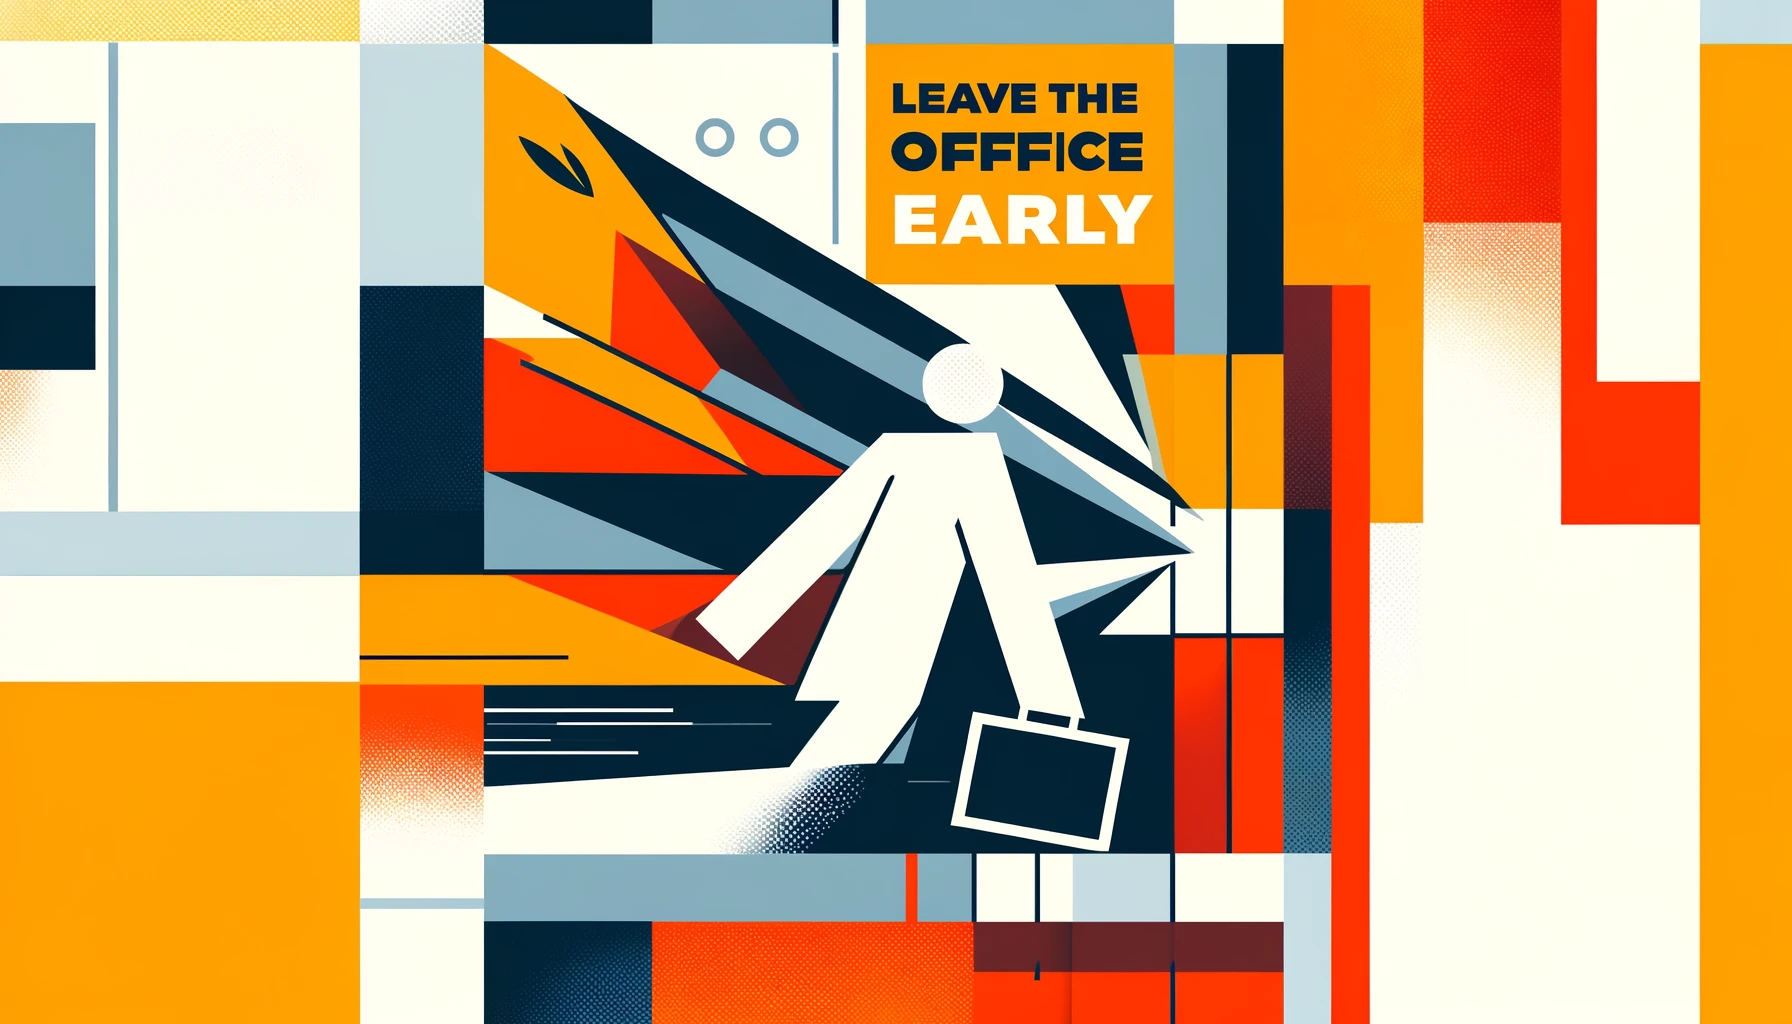 Brighten Your Workplace with Leave The Office Early Day Messages